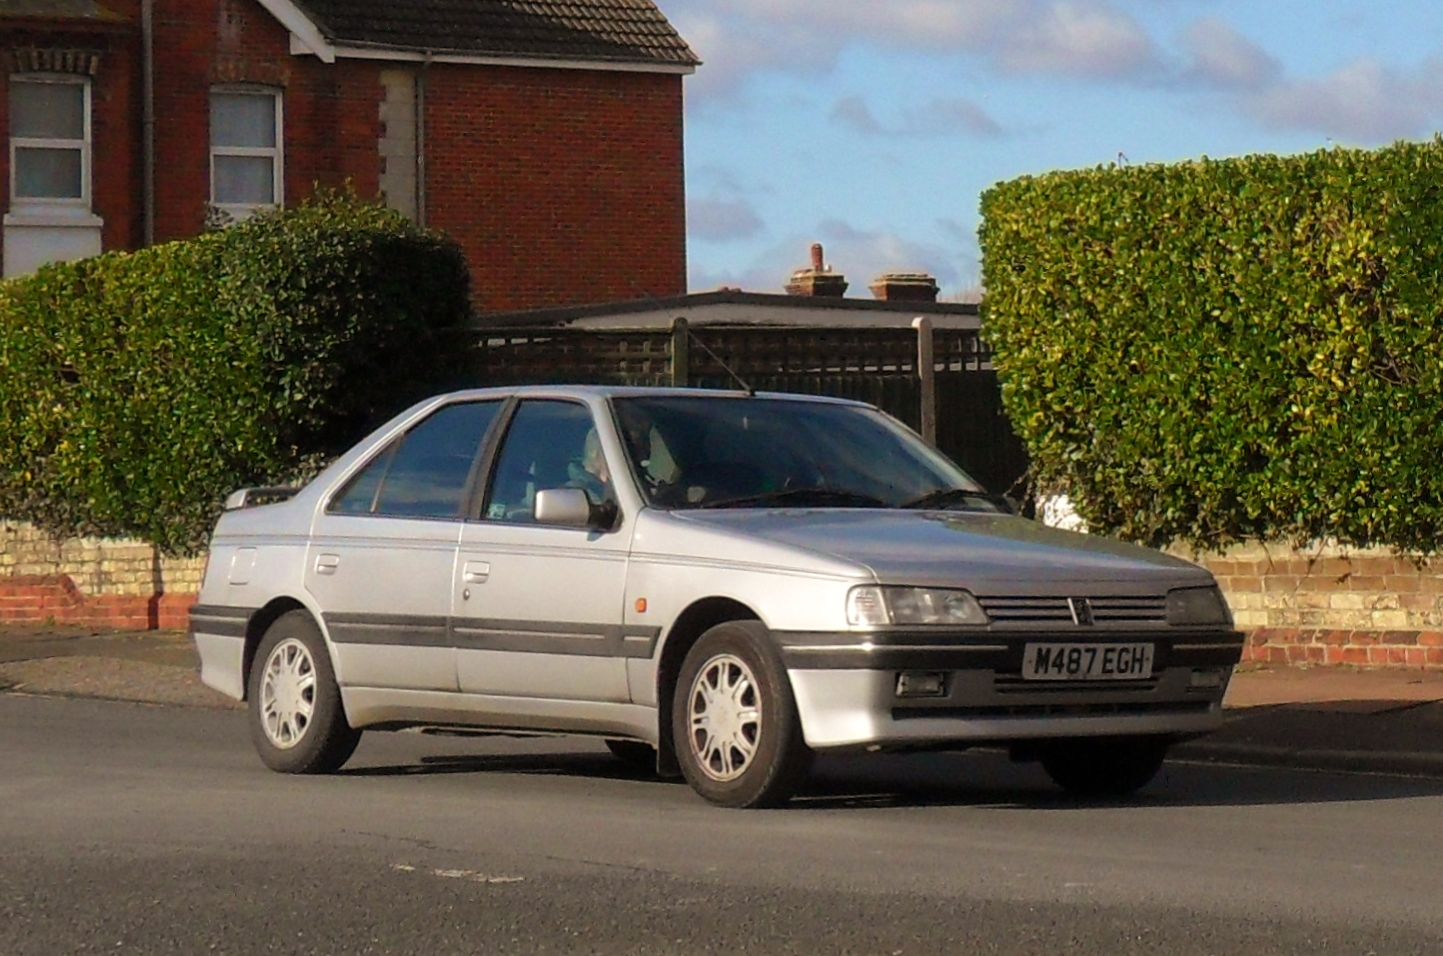 an older silver car is driving on the street